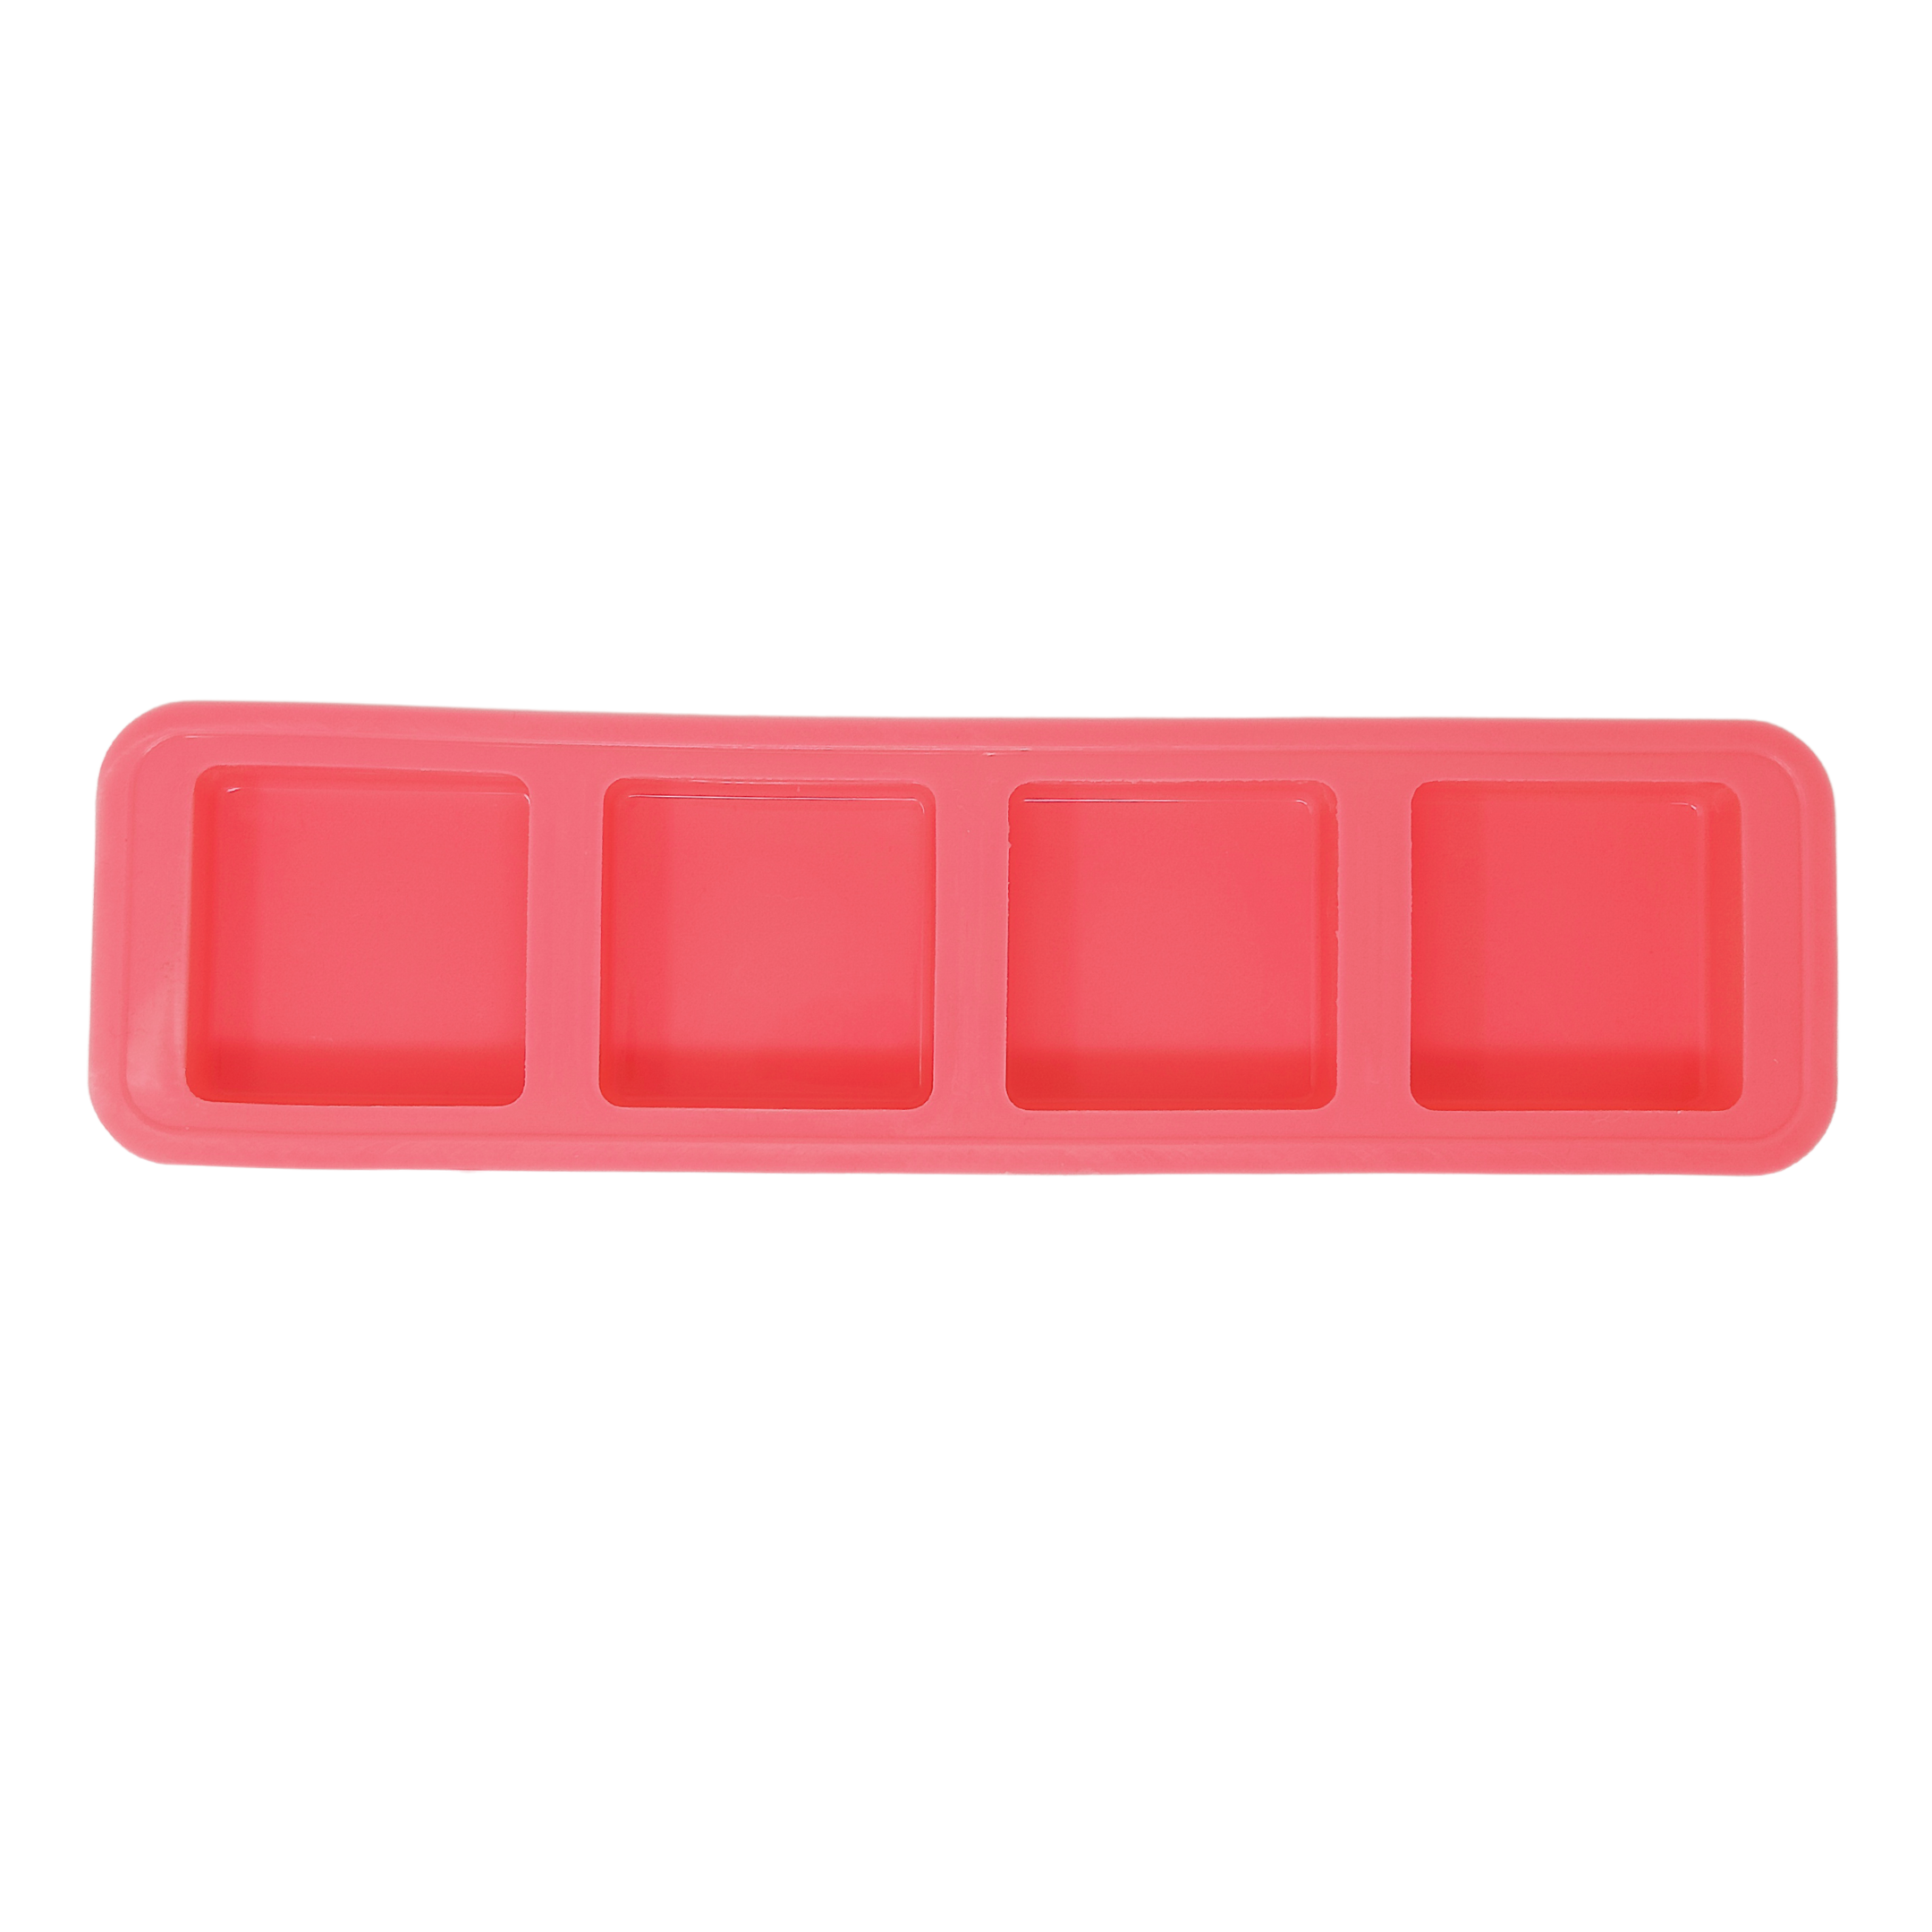 60ml Square Soap Mould - The Mould Story